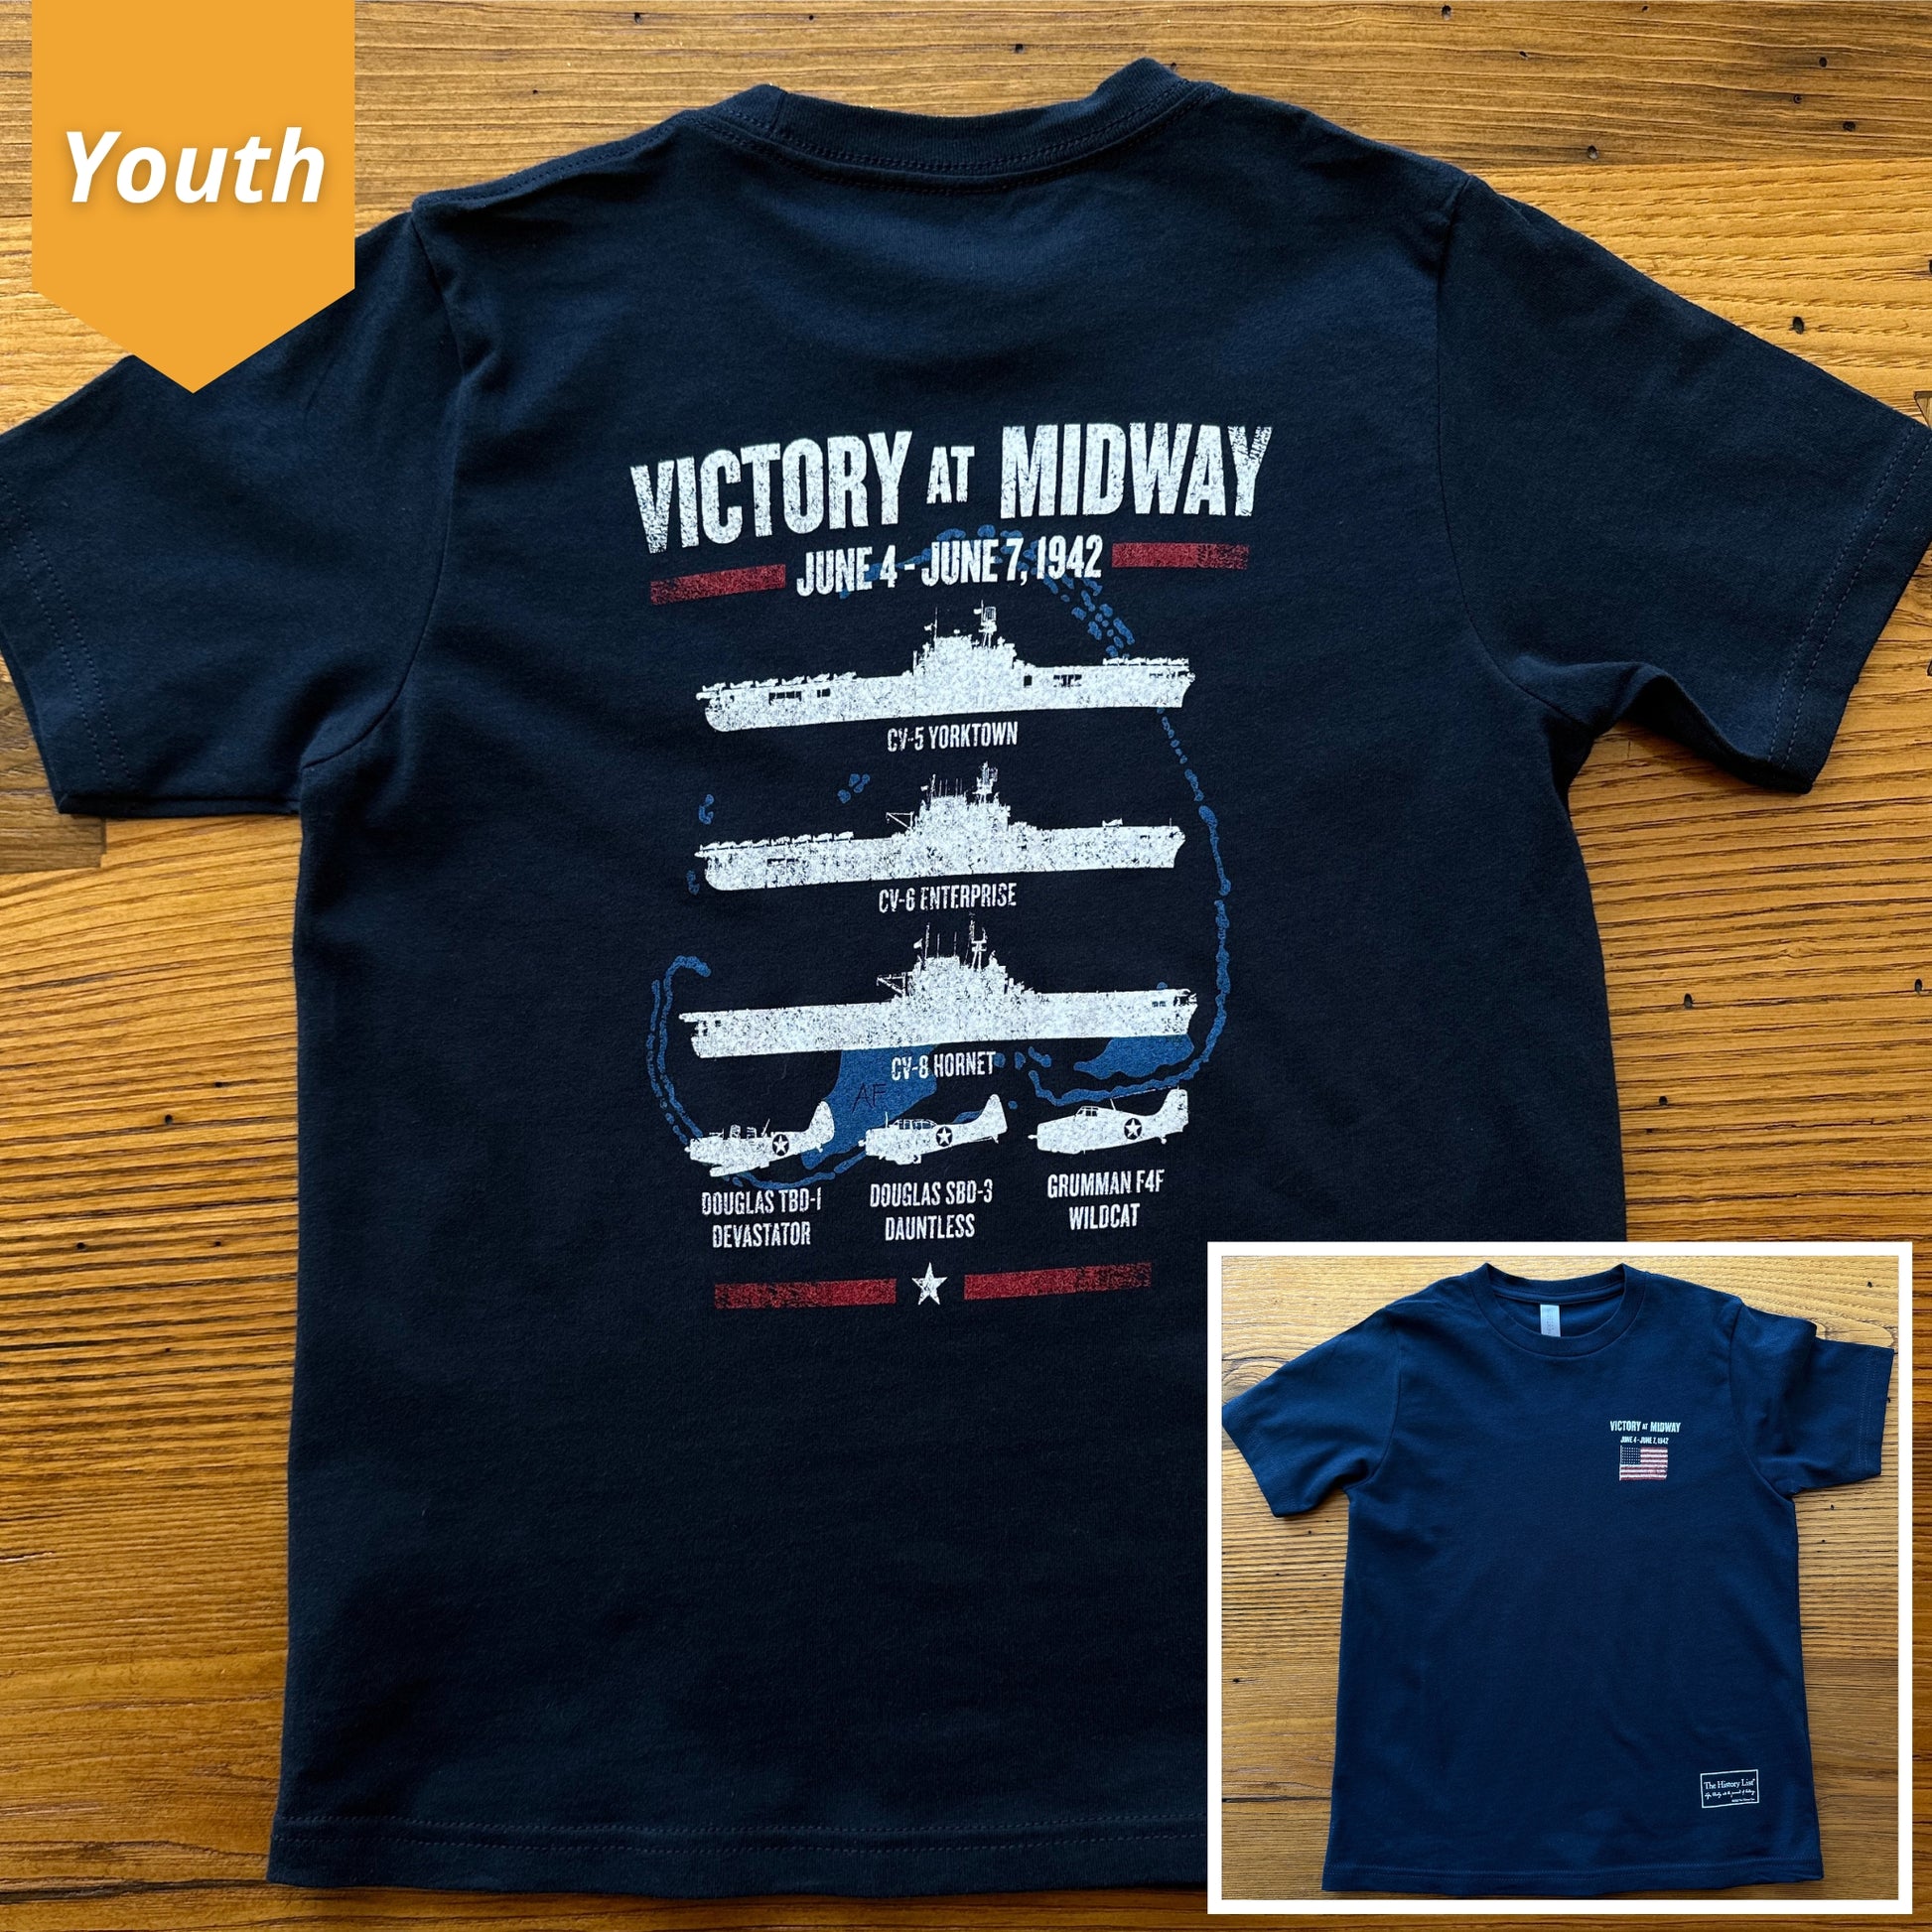 "Victory at Midway" Shirt in Youth sizes from The History List store